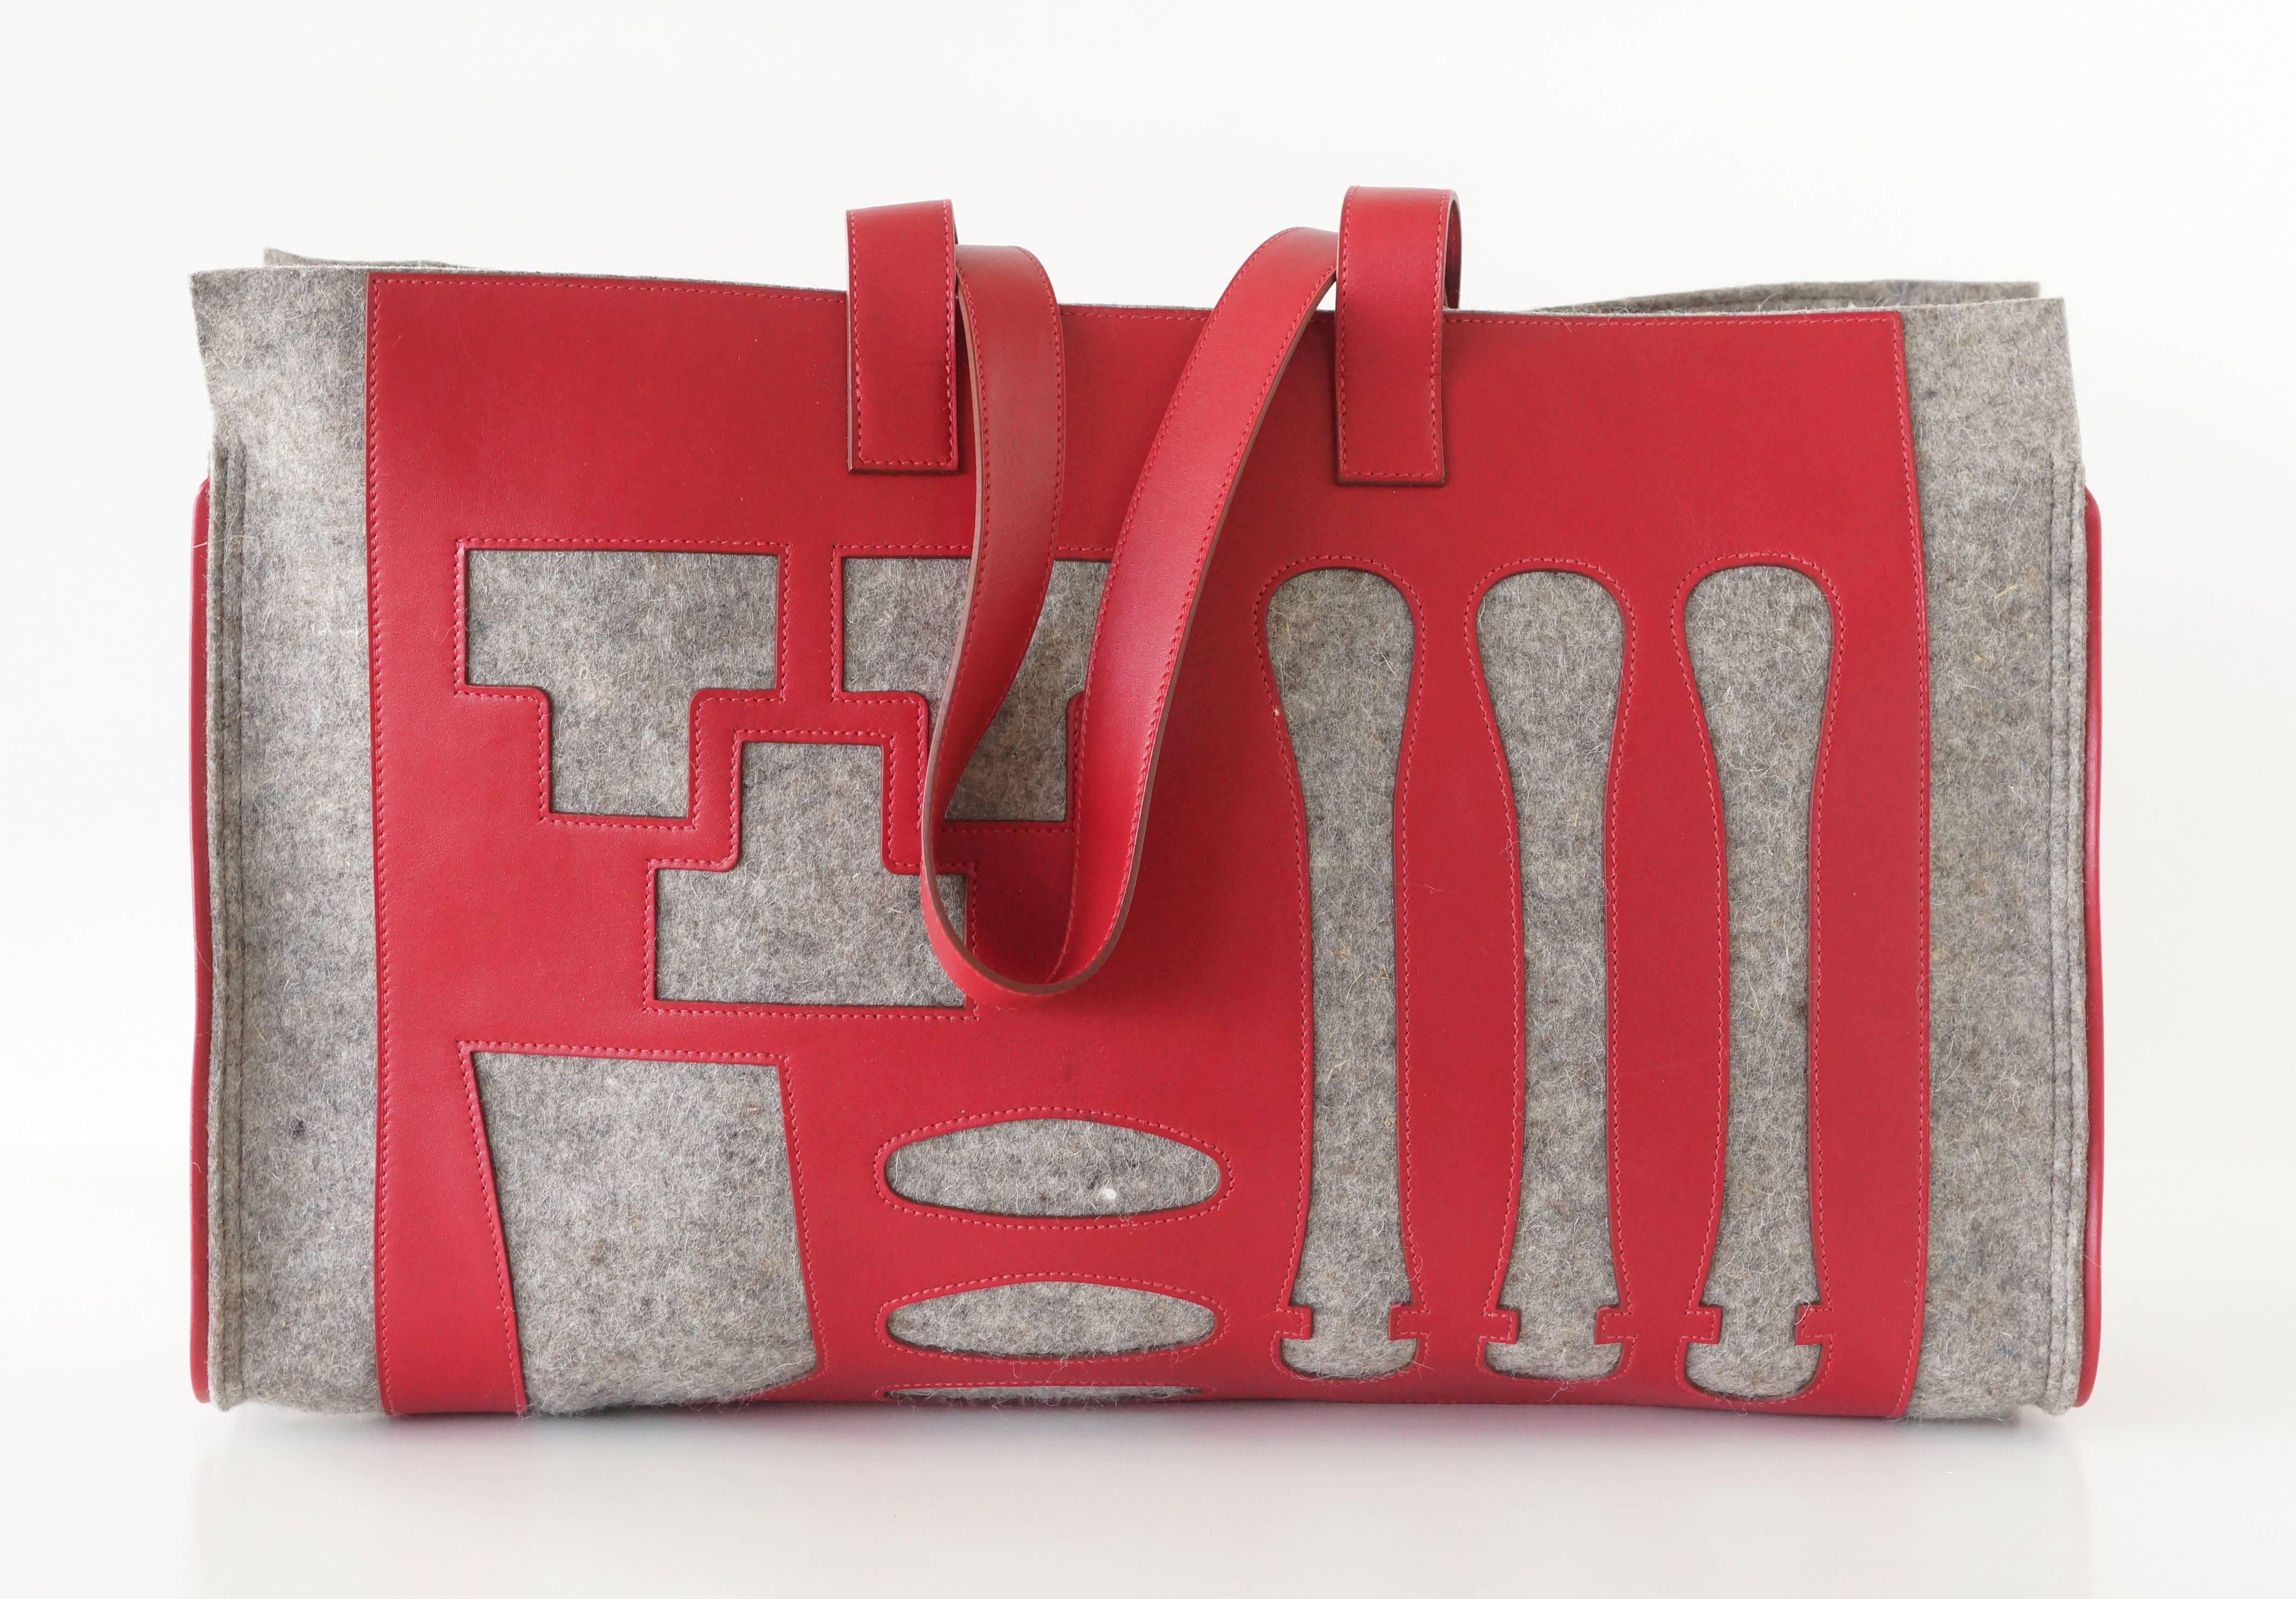 Limited Edition Petit h GM Skeleton grey natural felt and red swift leather tote.
The red leather is the cut out of a birkin.
A super coveted tote.
Interior signature leather plaque.
Utterly FABULOUS!
Has some natural markings.  
Comes with